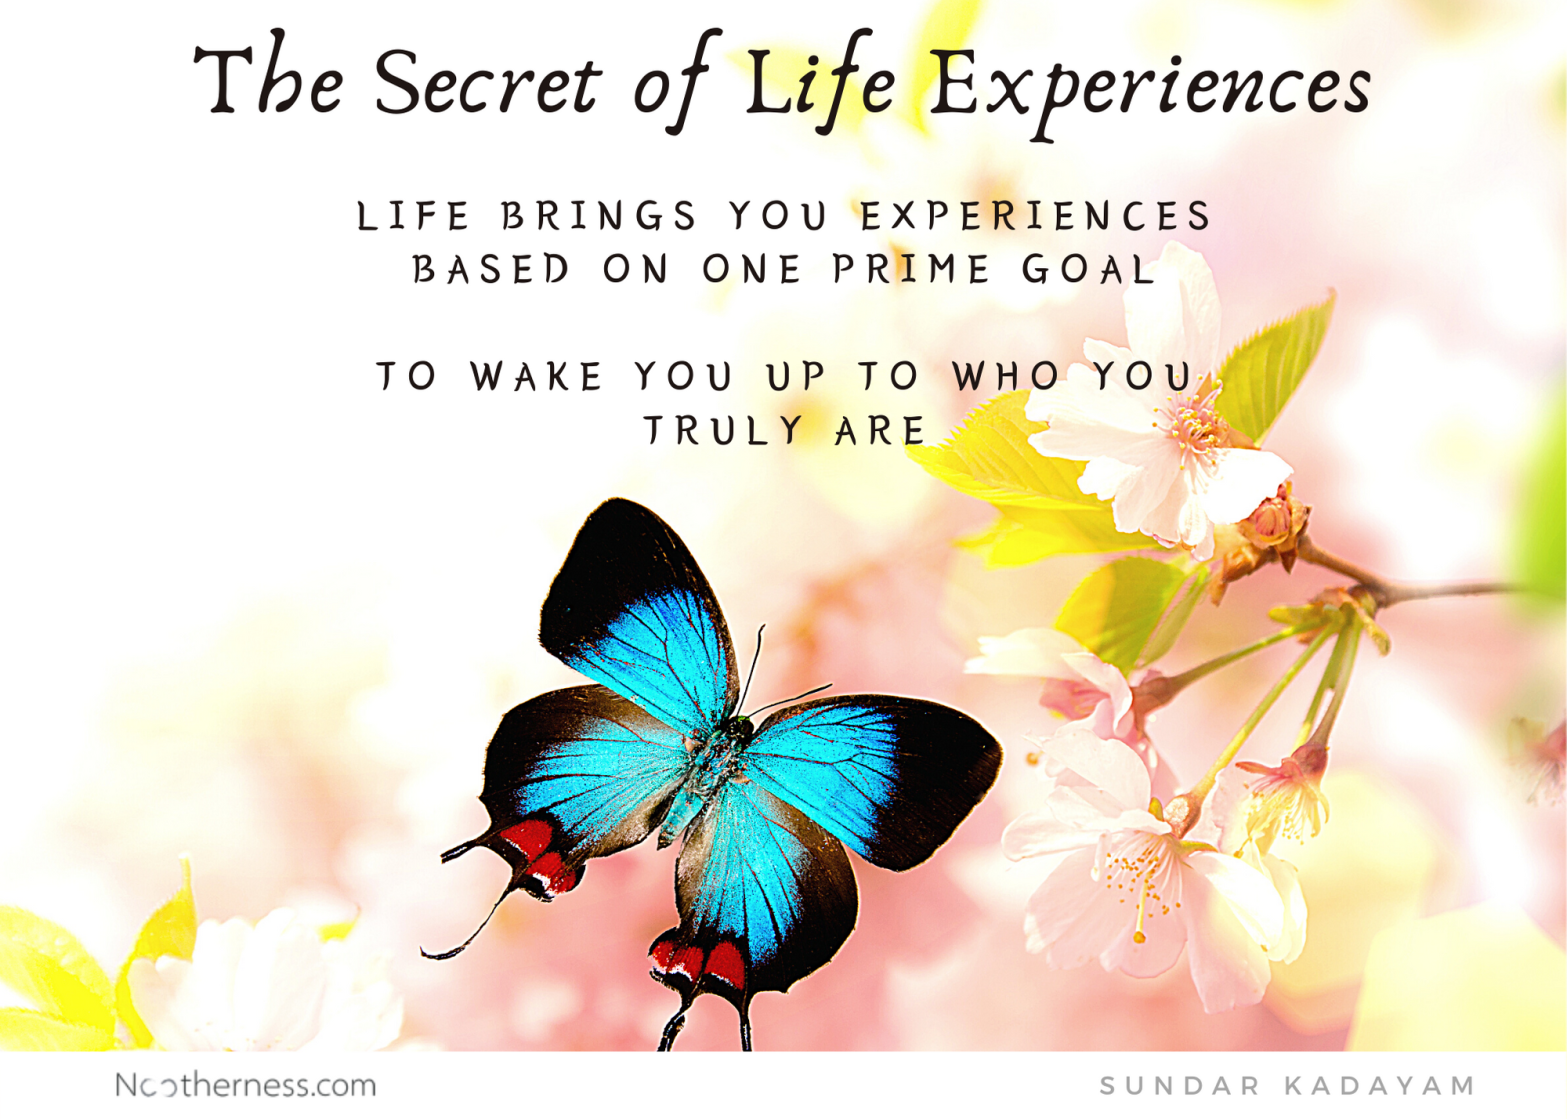 What is the secret of life experiences?